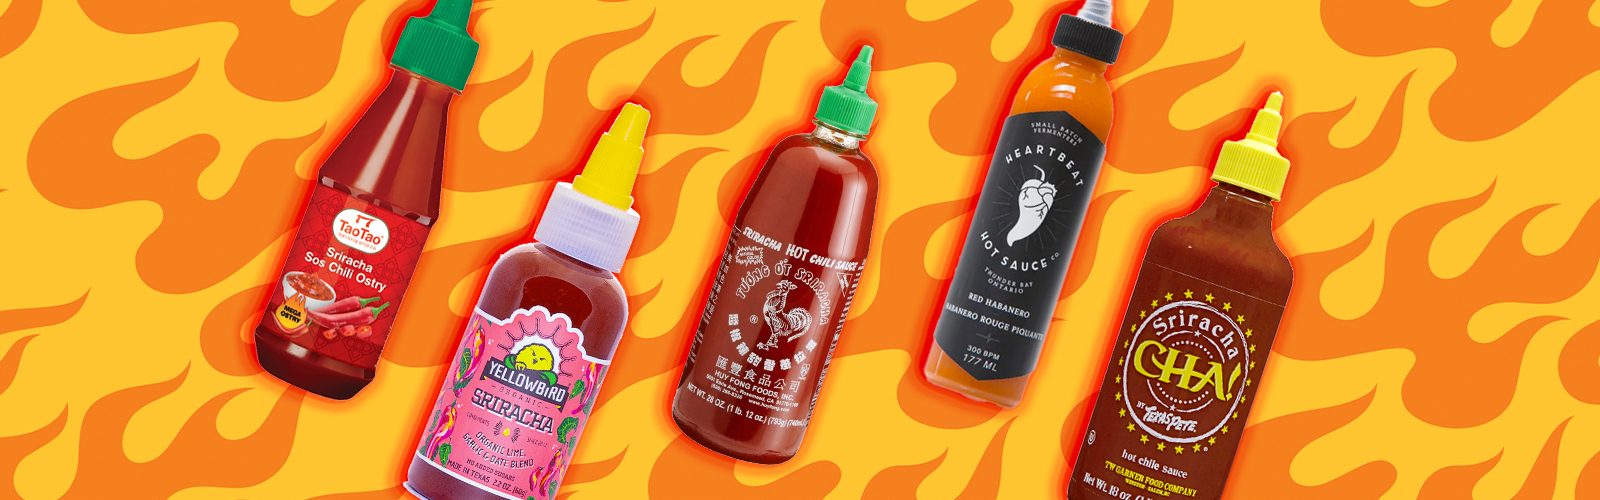 Red Gold and Pop! Gourmet Foods Launch New Sriracha Sauce